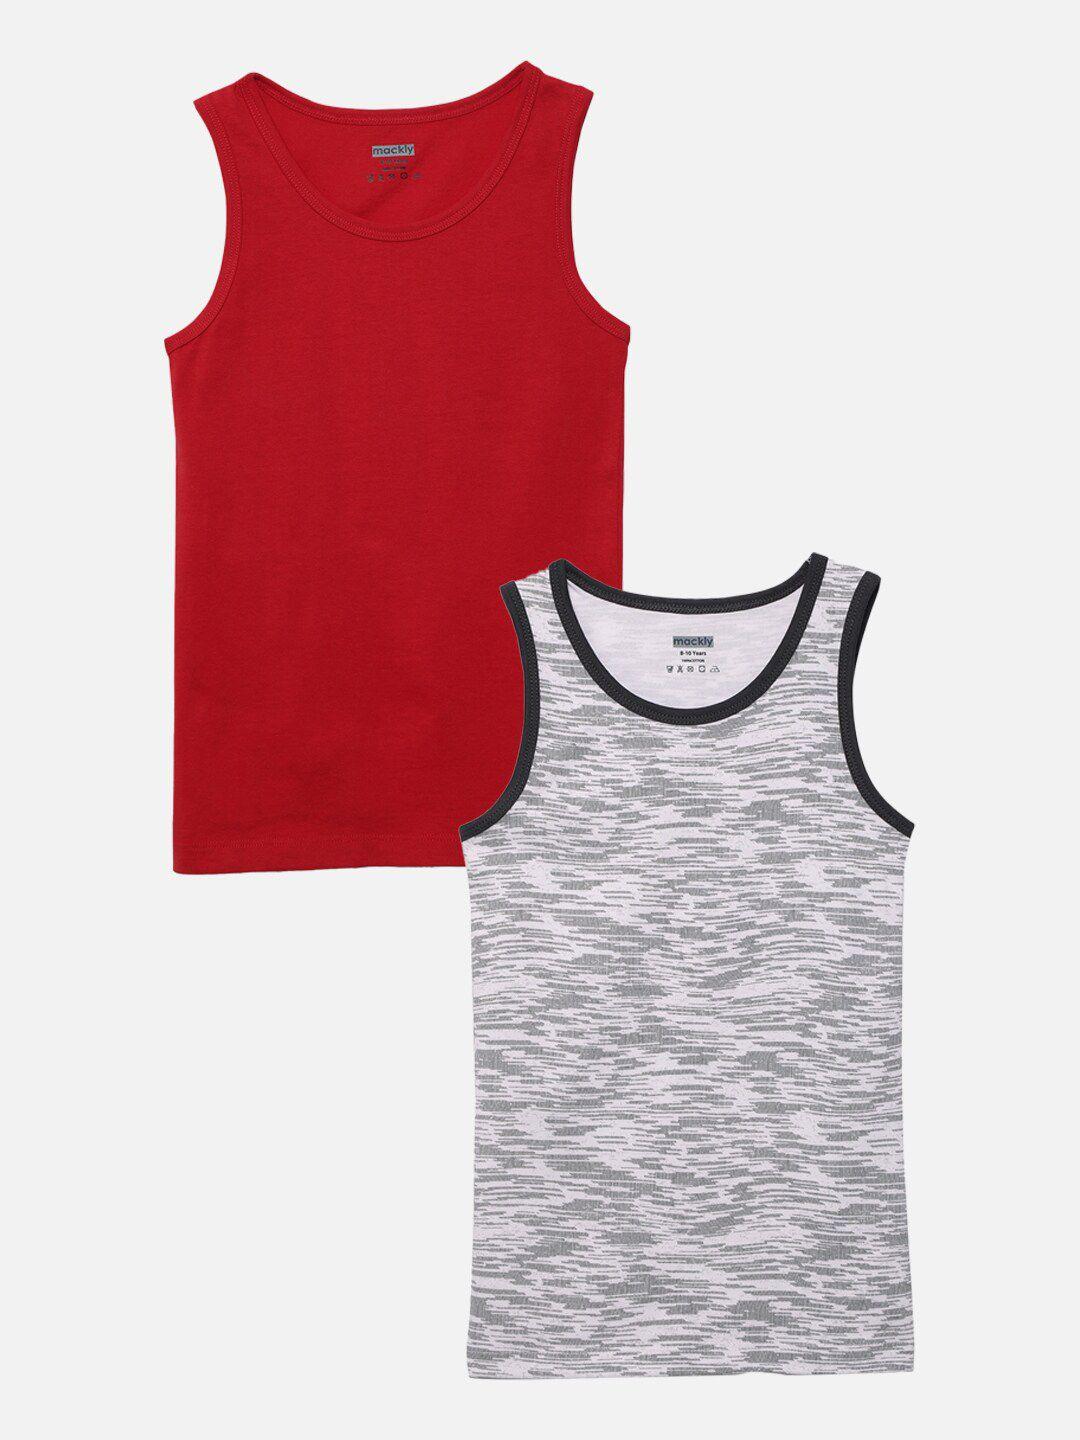 mackly-boys-pack-of-2-printed-pure-cotton-sleeveless-basic-innerwear-vests-mb-694-695